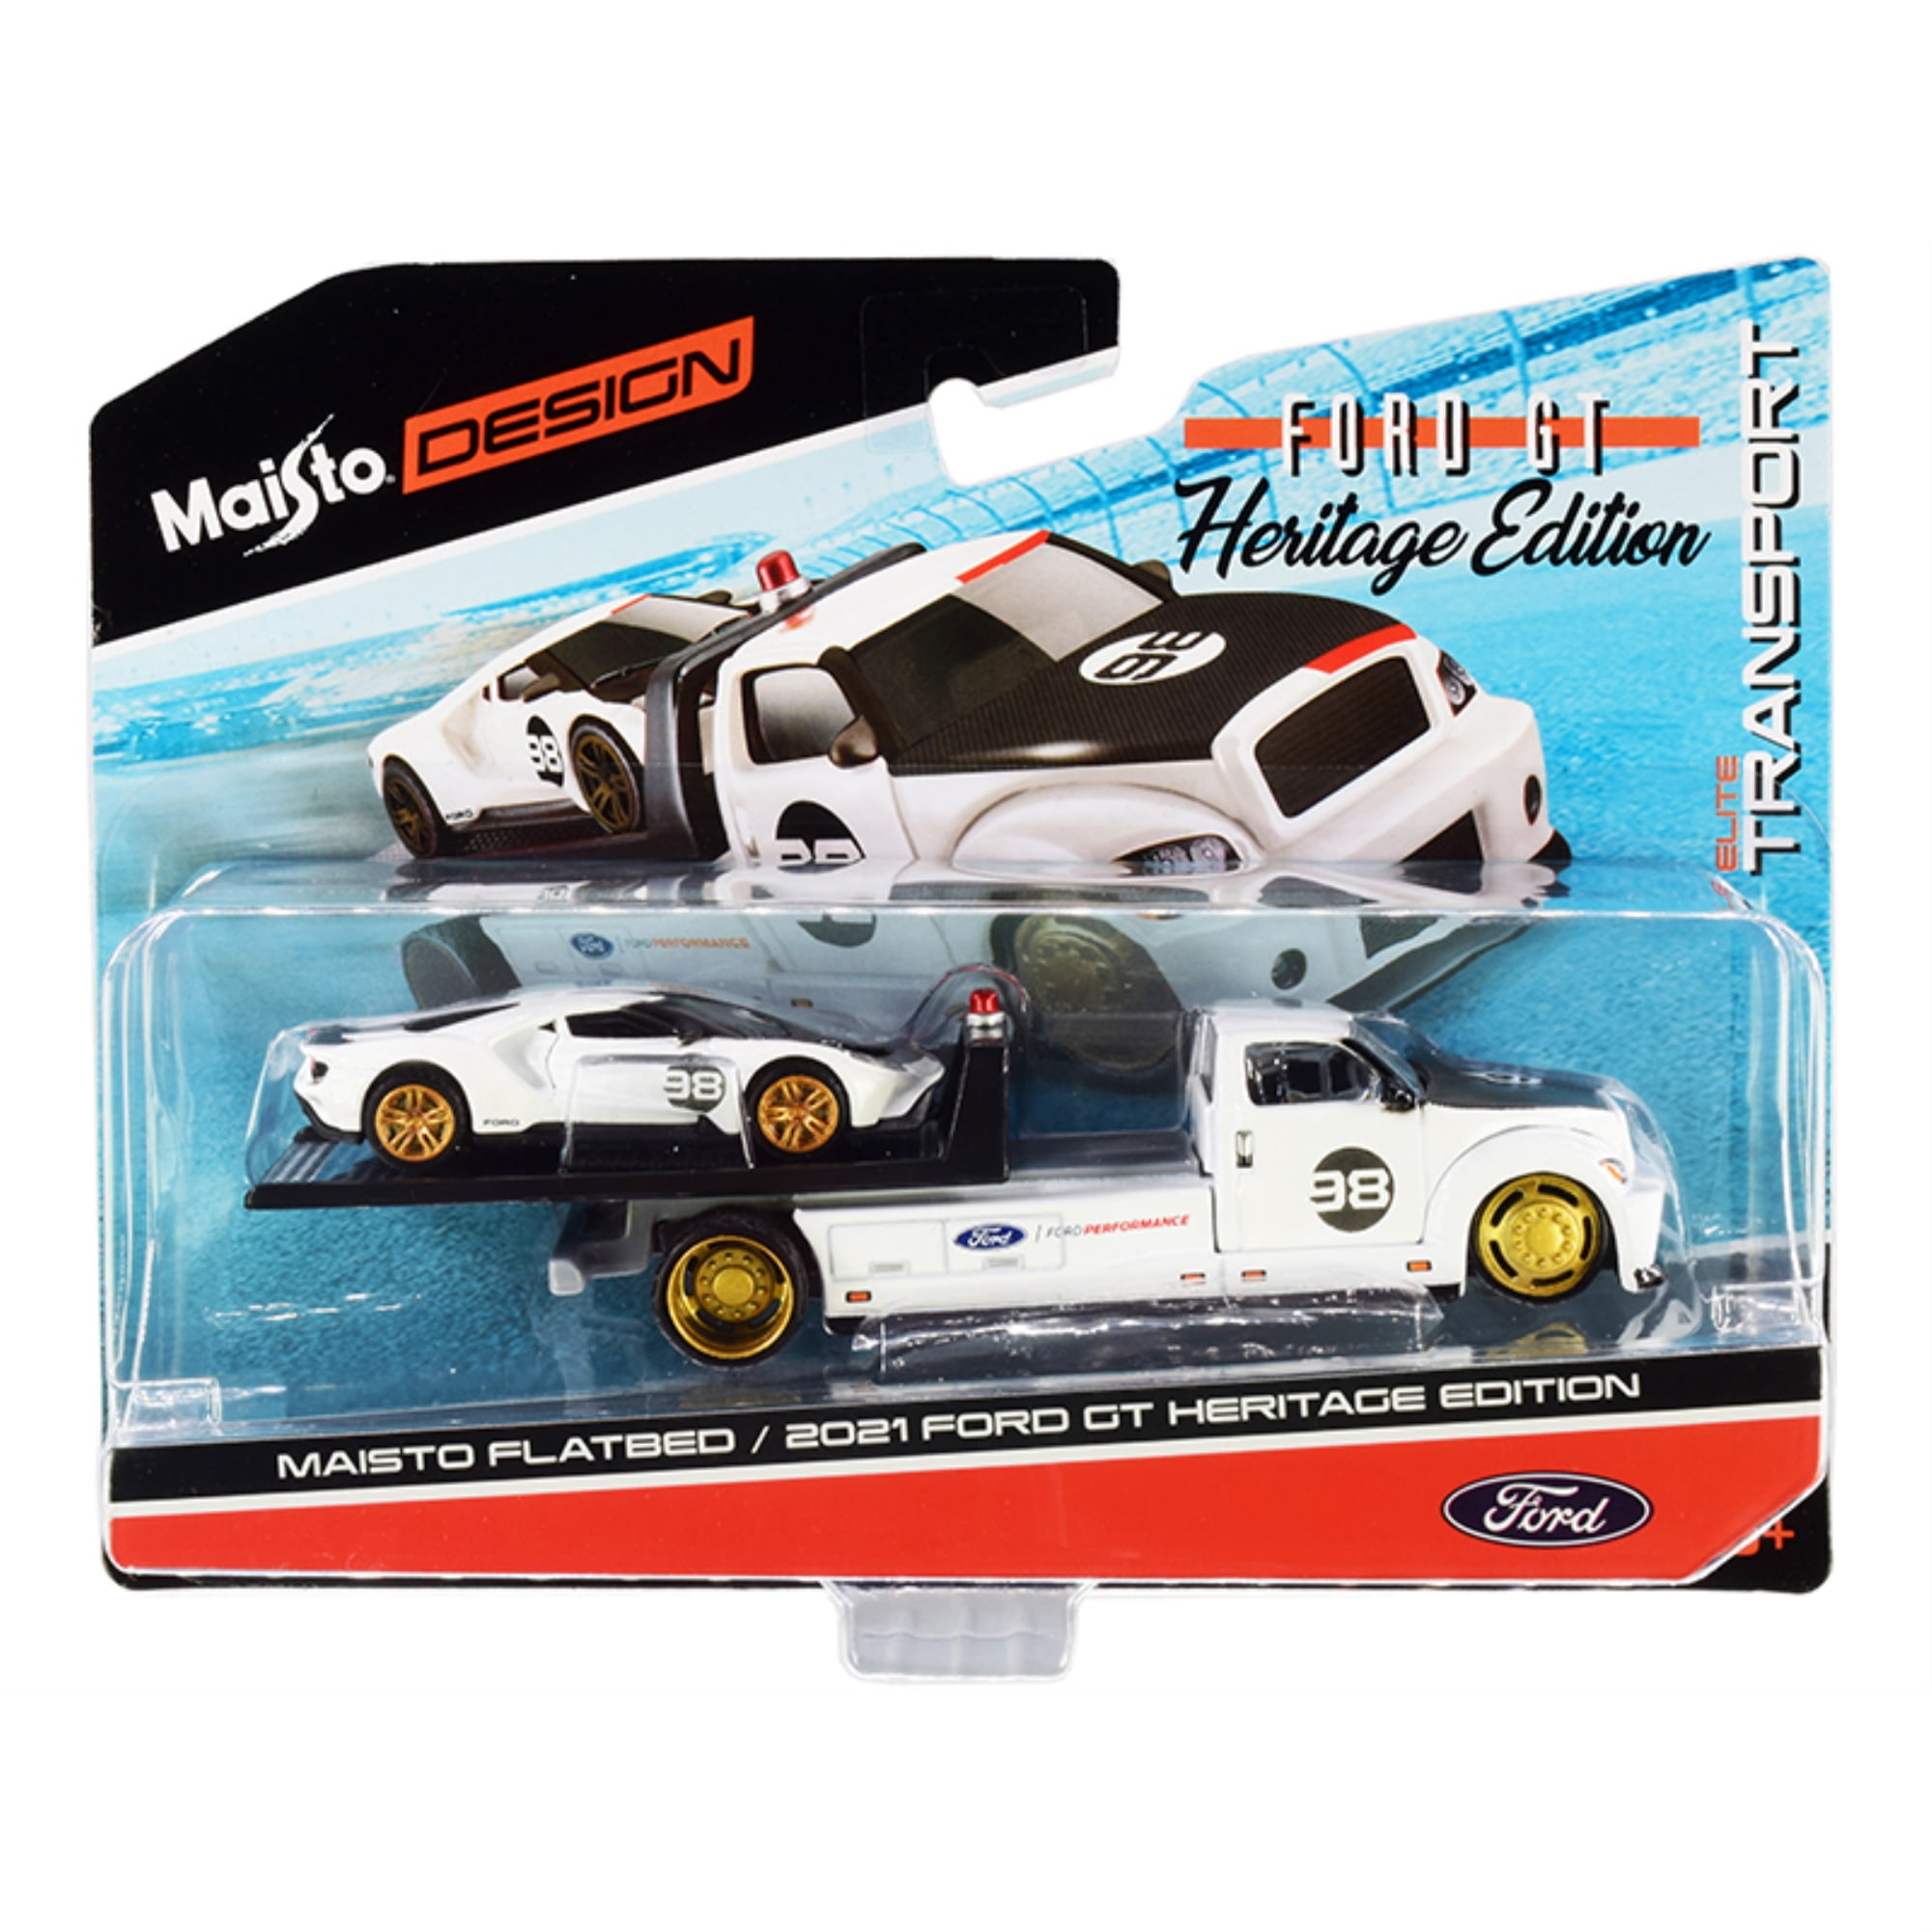 Picture of Maisto 15108-21A Series 0.16 4 Diecast Model Car for 2021 Ford GT No. 98 Heritage Edition with Flatbed Truck White & Black Elite Transport